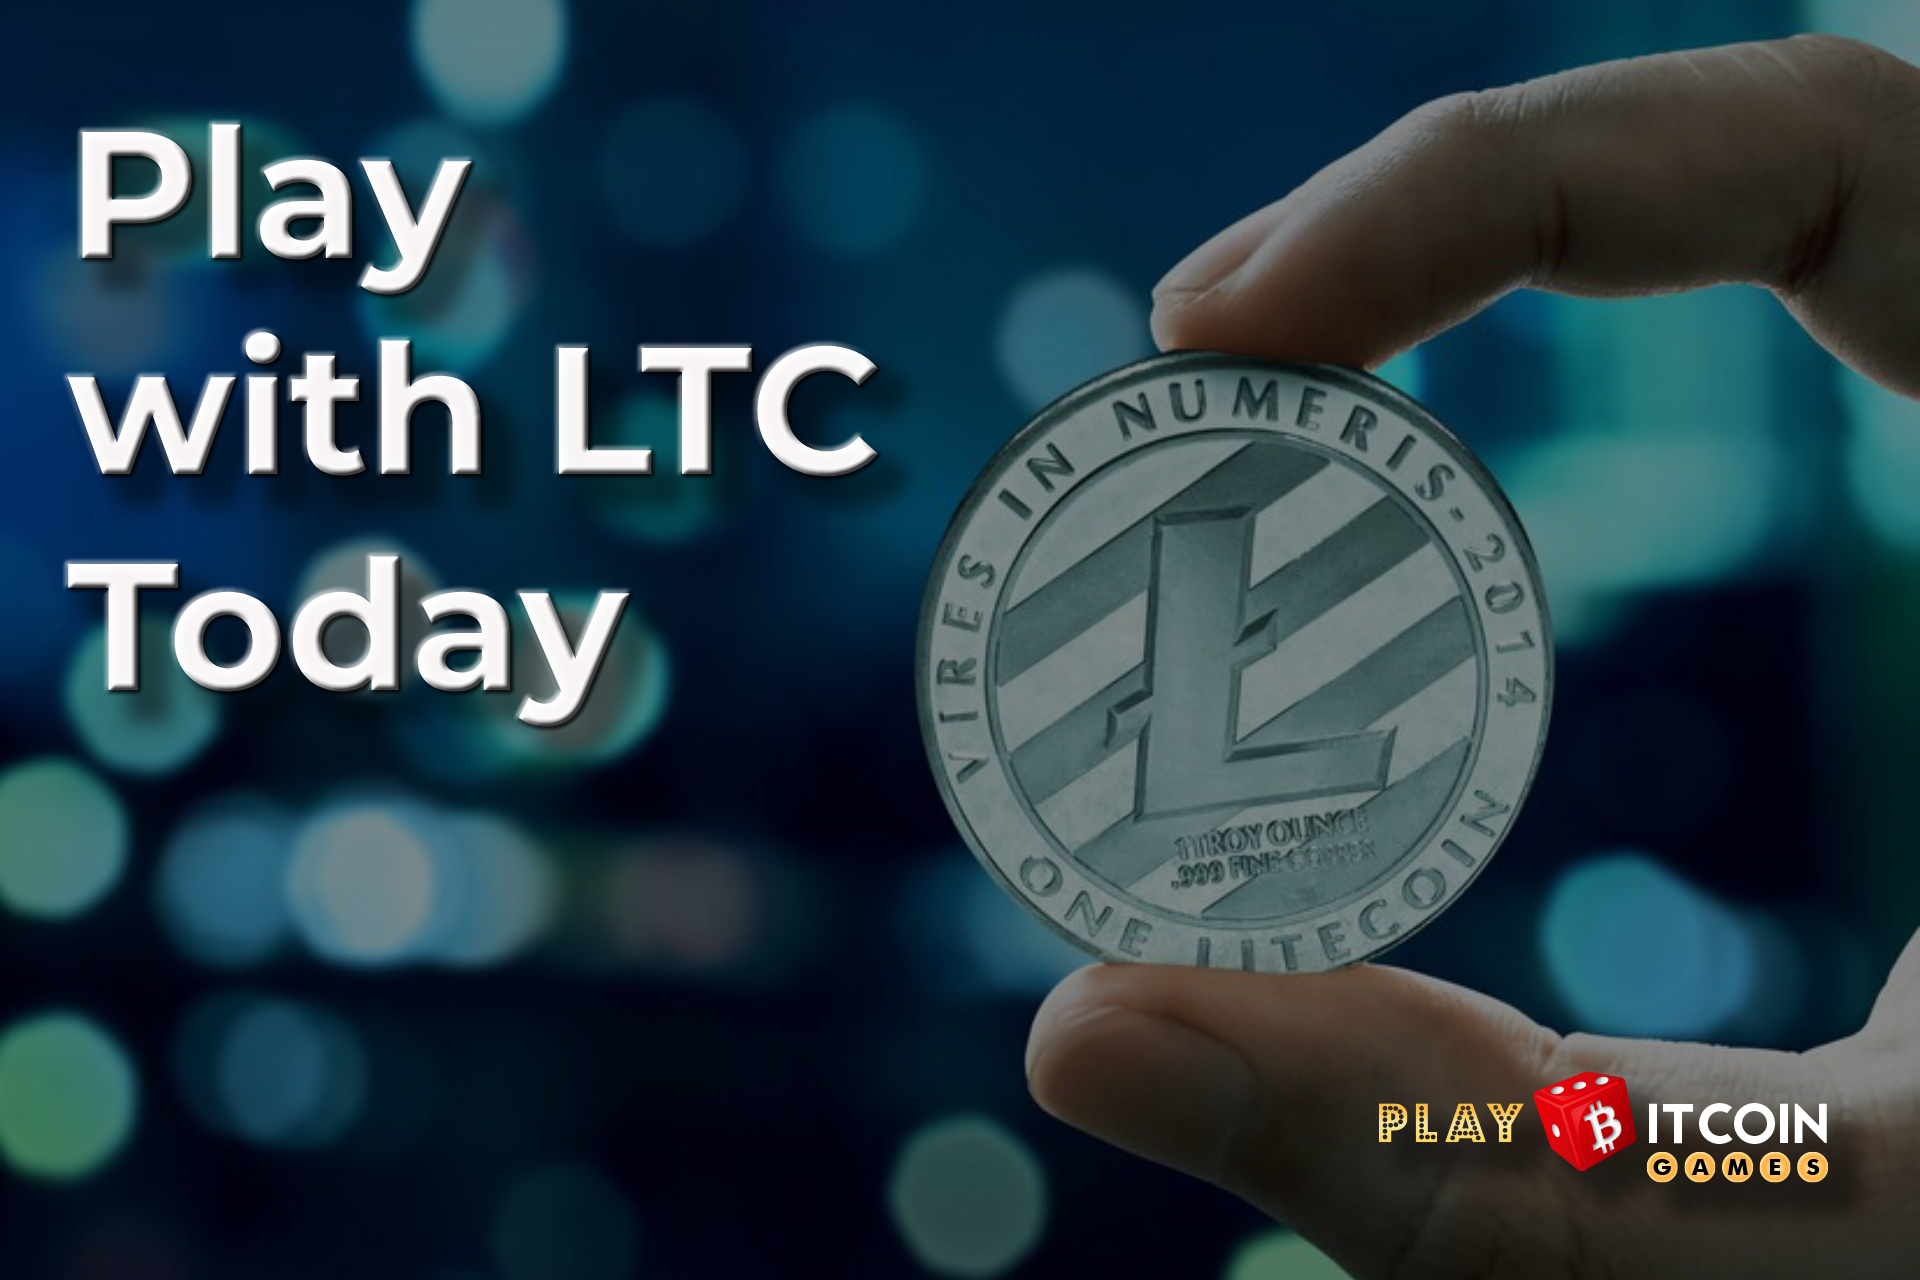 Play with LTC Today at Play Bitcoin Games, Your Top Destination for Litecoin Casino Fun